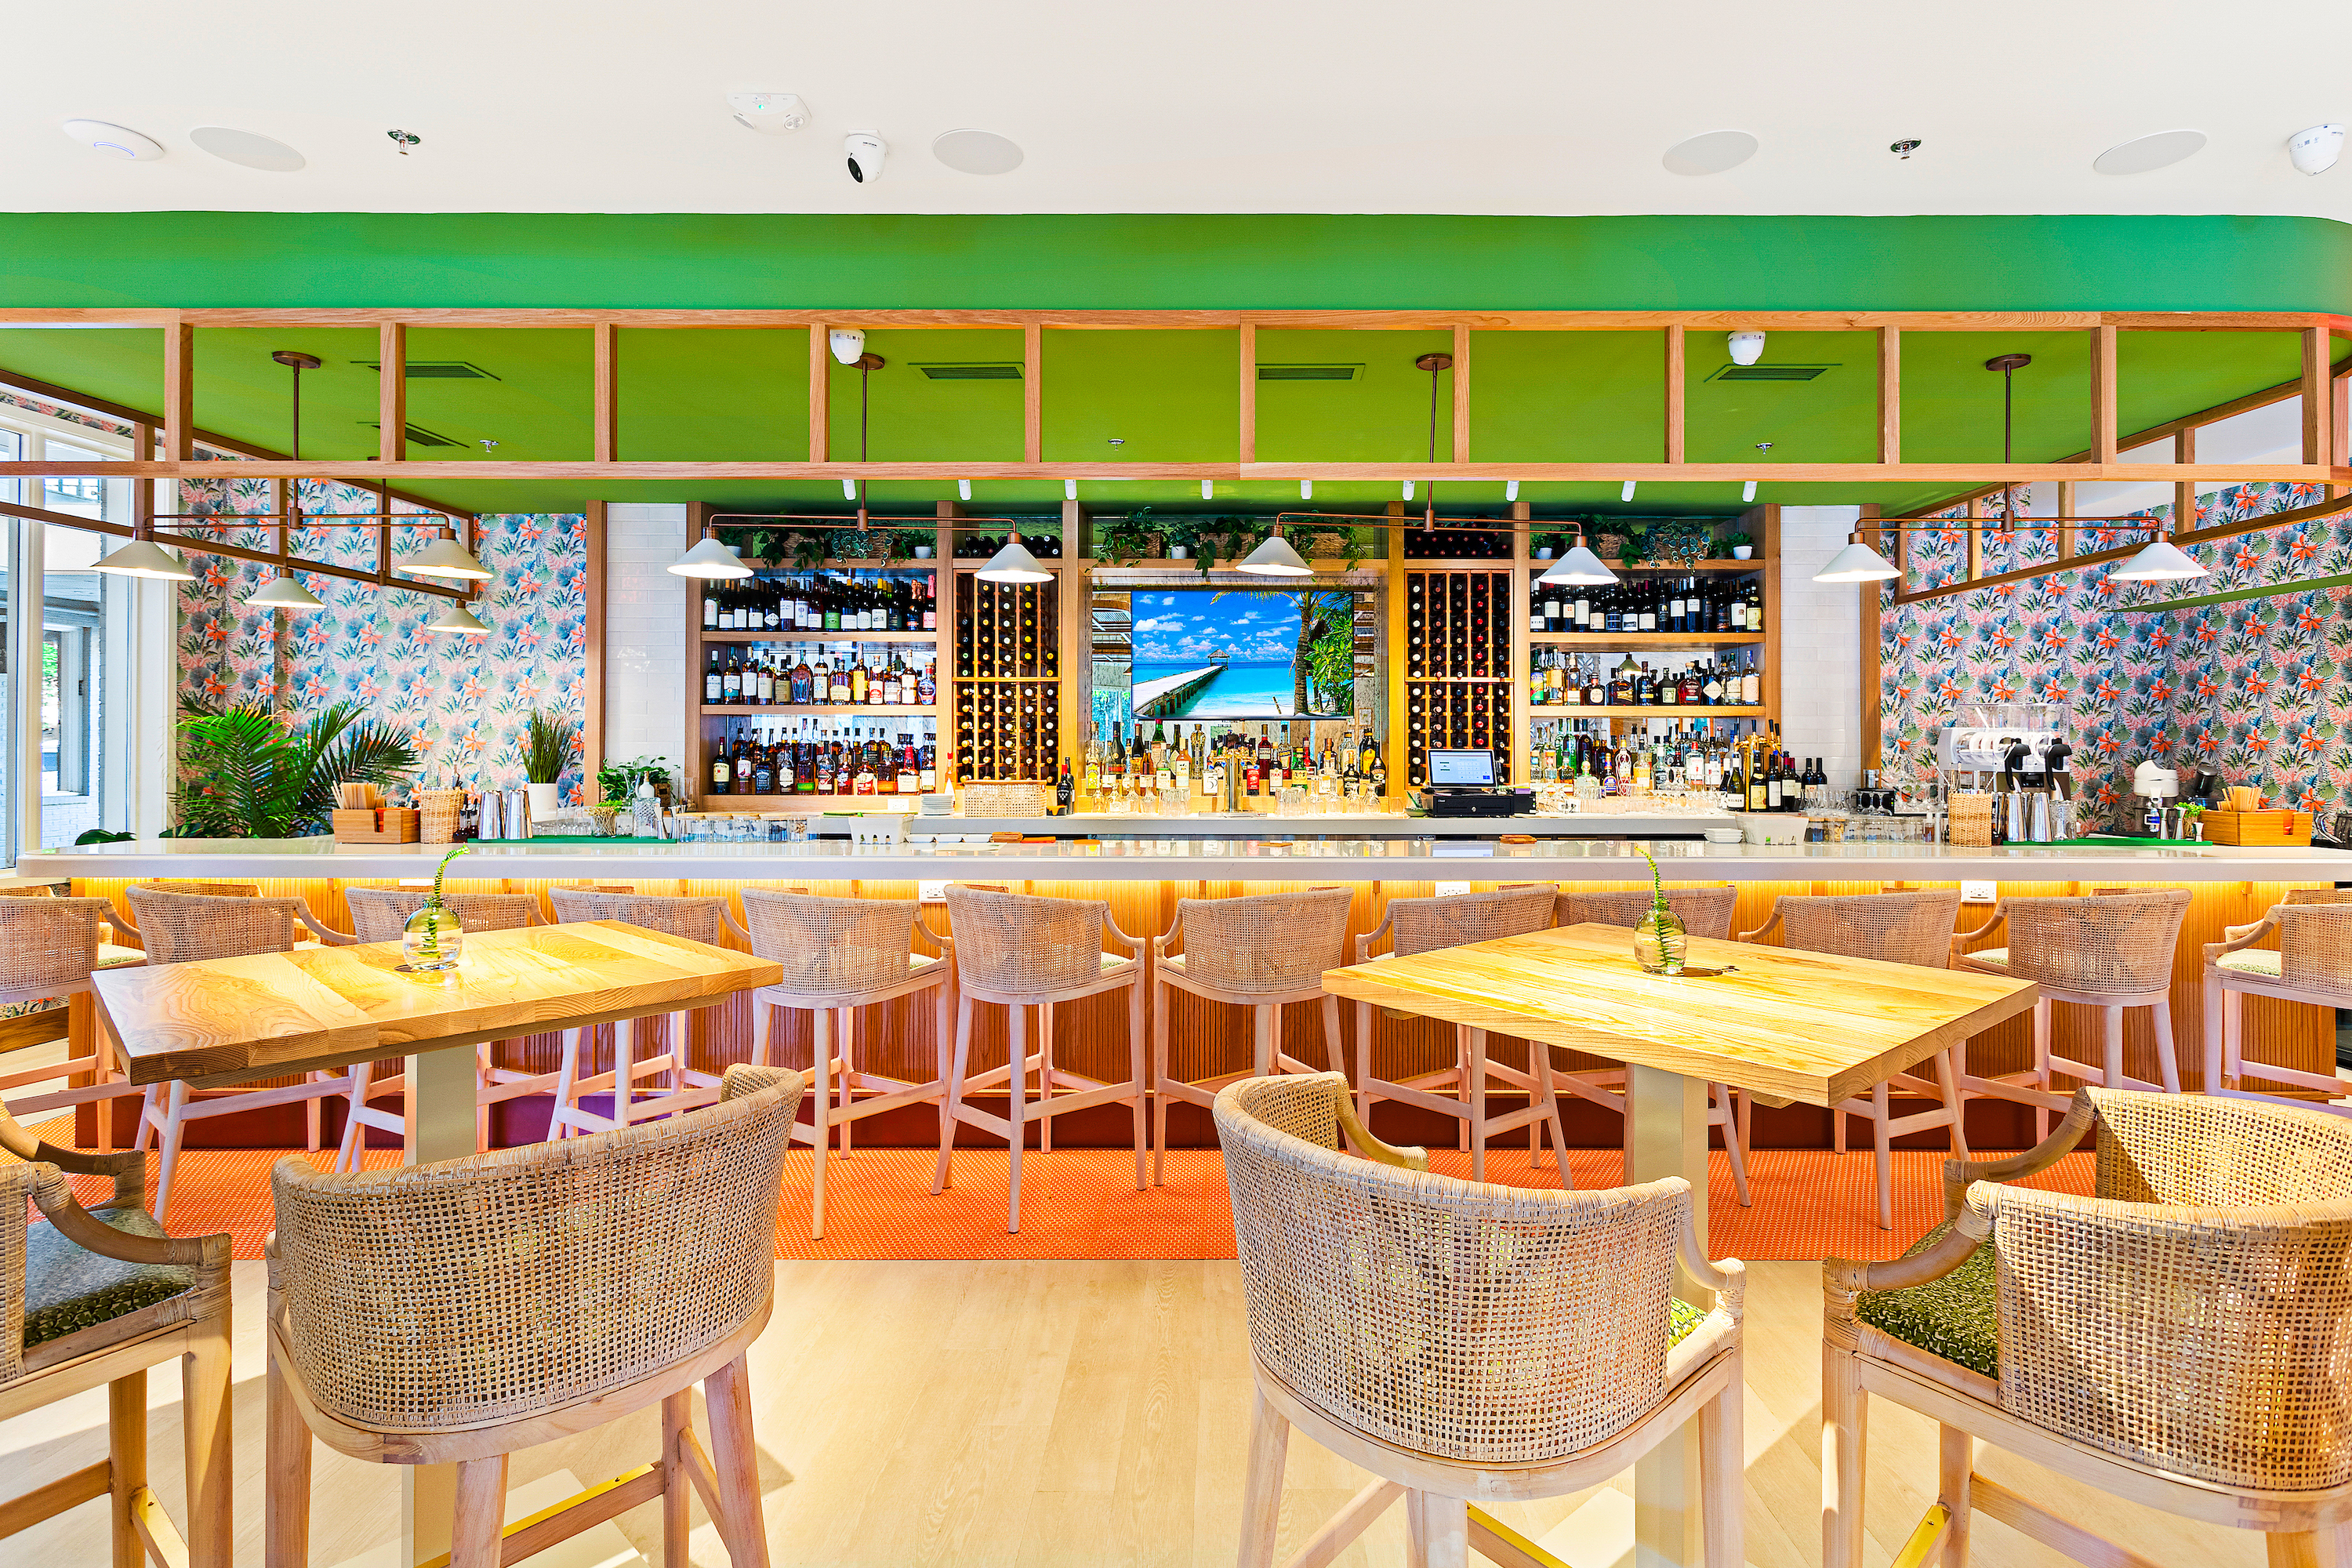 A bar with green wallpaper and tropical colors